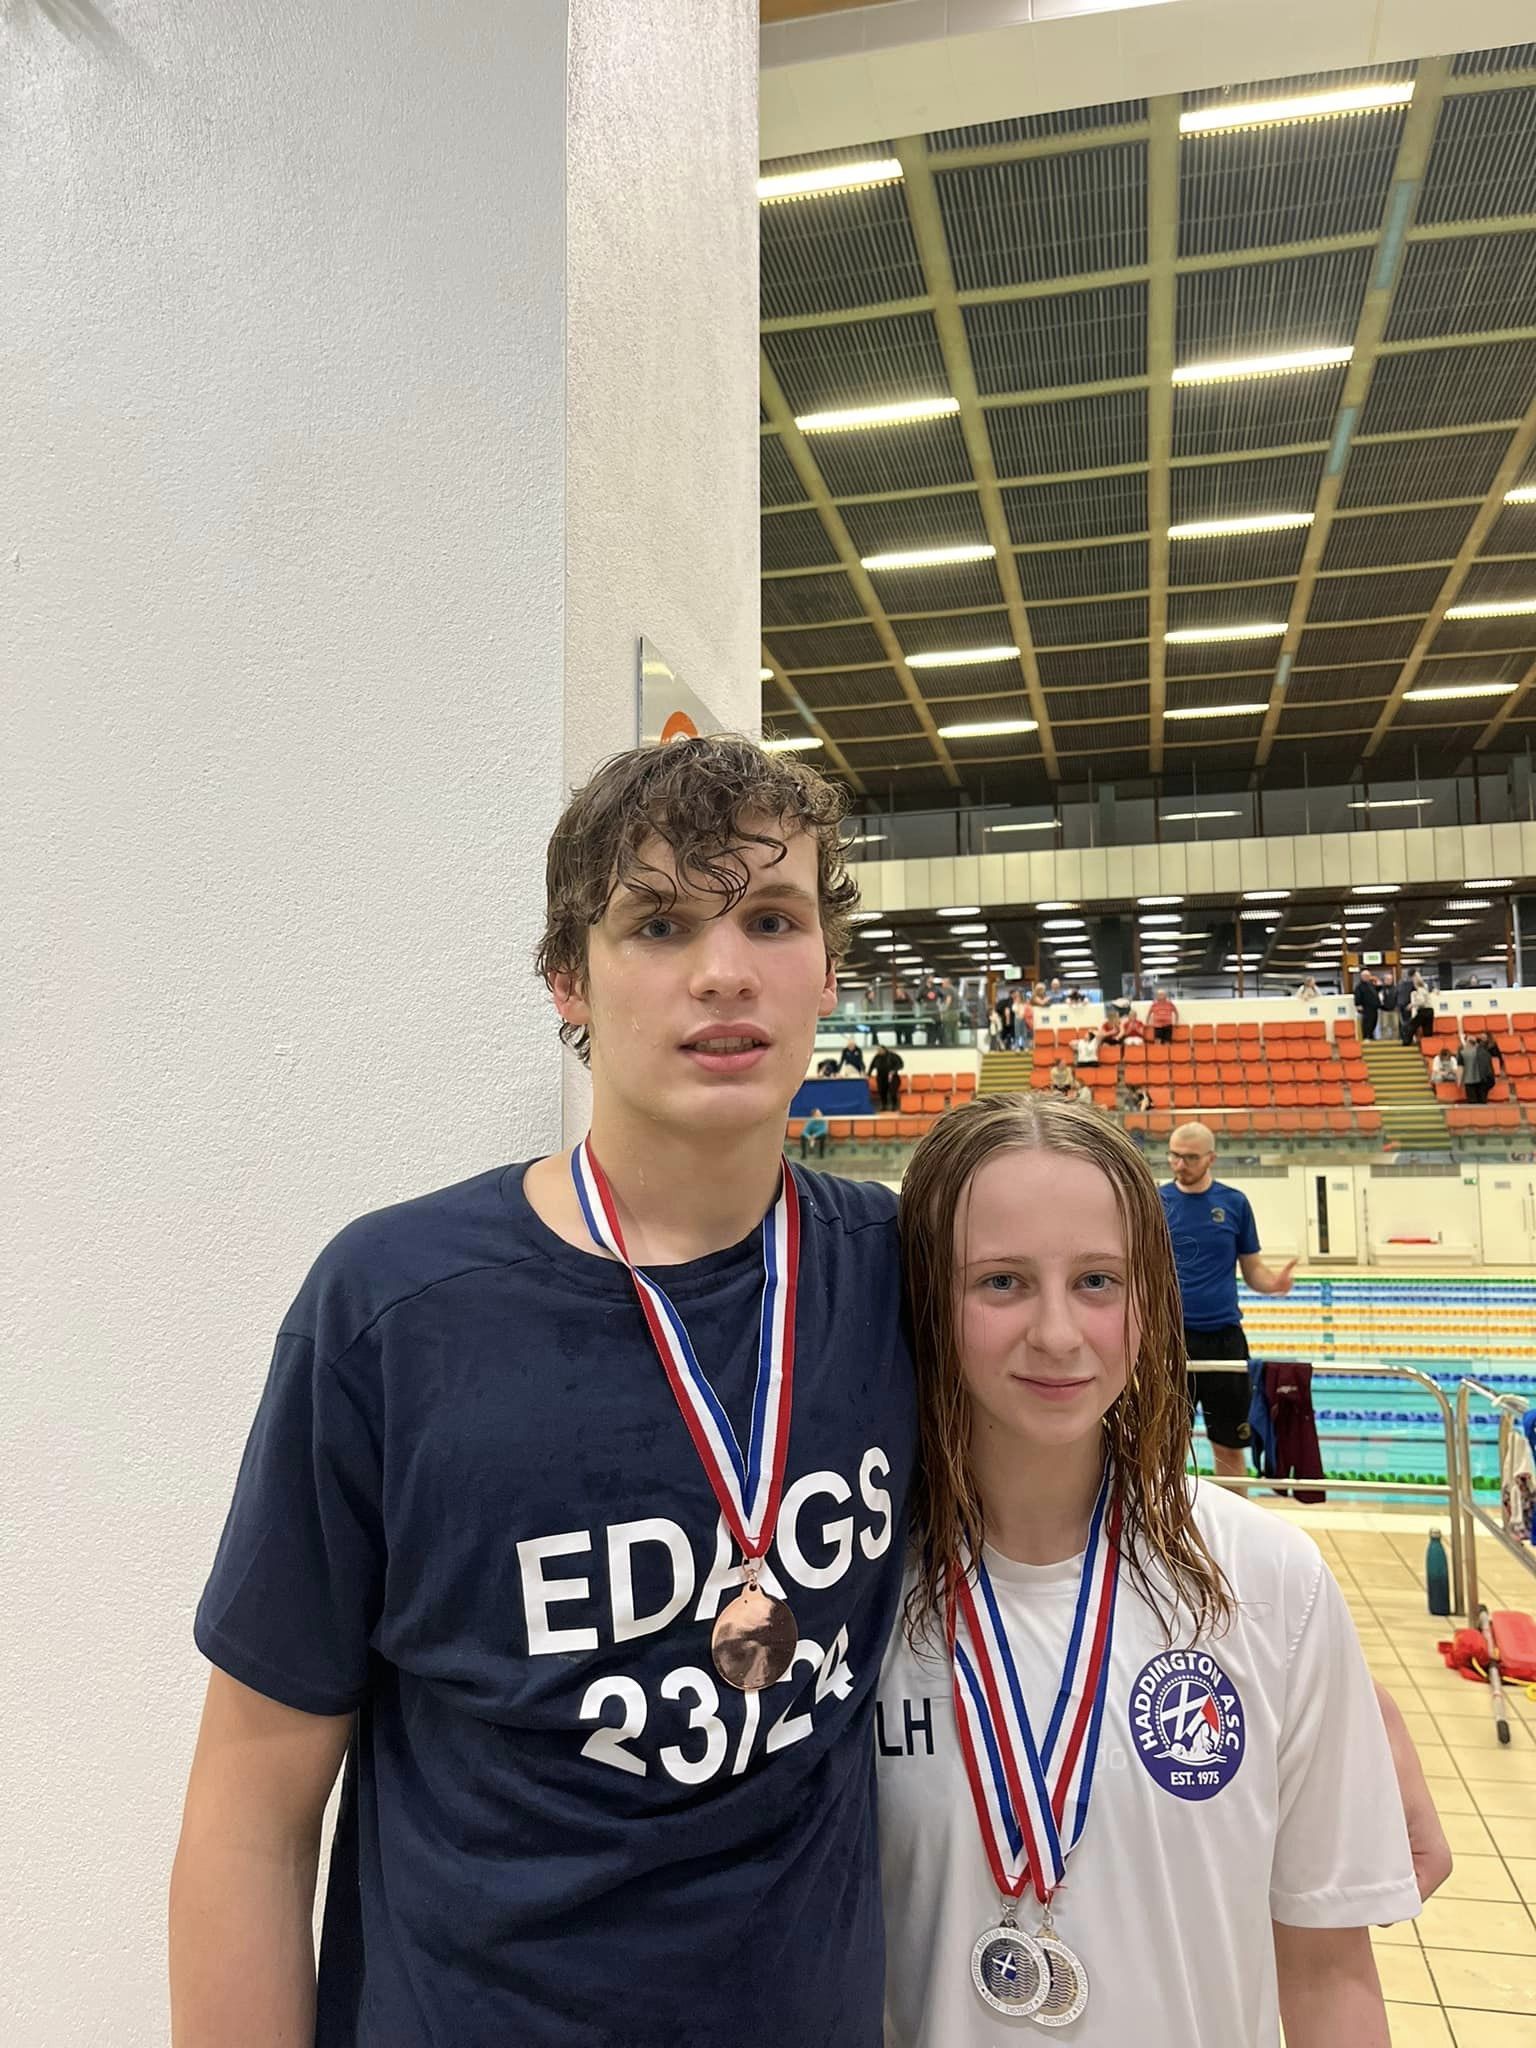 Connor Aspinall and Lucy Hall both finished on the podium at the Royal Commonwealth Pool